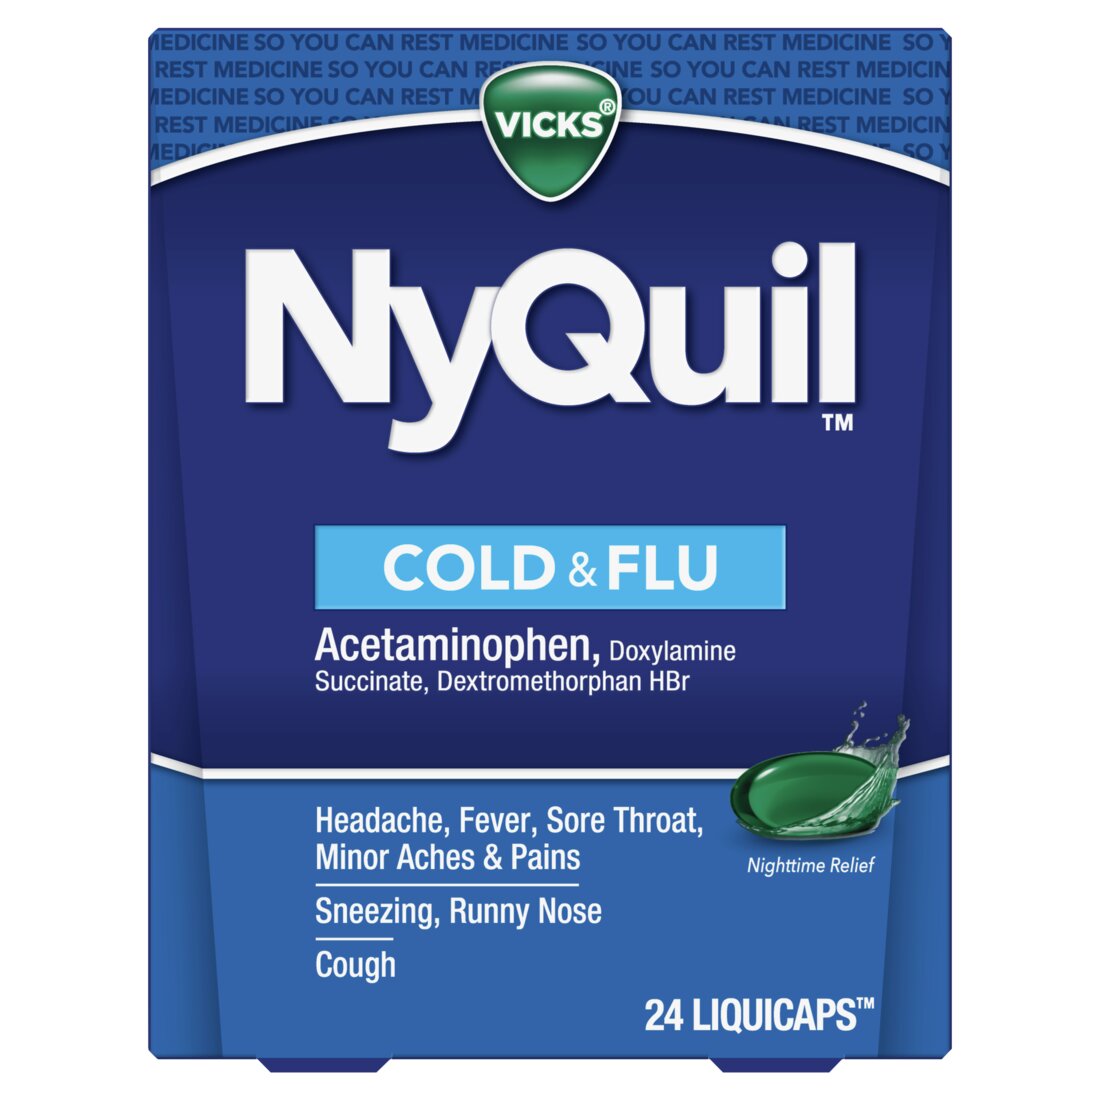 Vicks NyQuil Cold and Flu Relief Liquid Medicine Nighttime Relief (Liquicaps) - 24ct/24pk